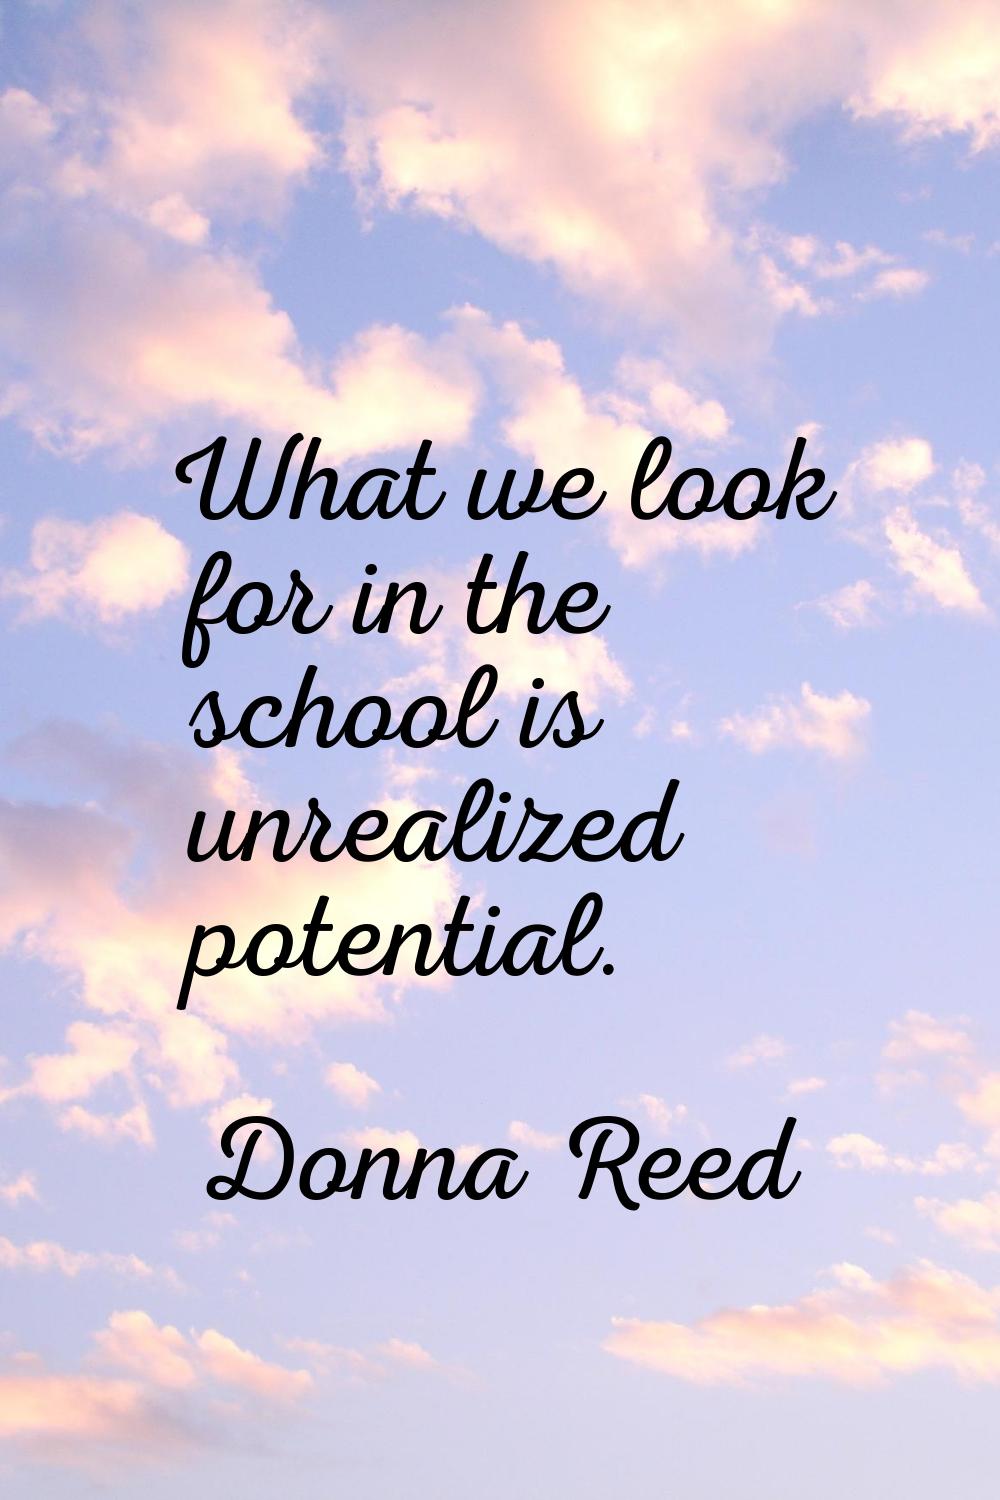 What we look for in the school is unrealized potential.